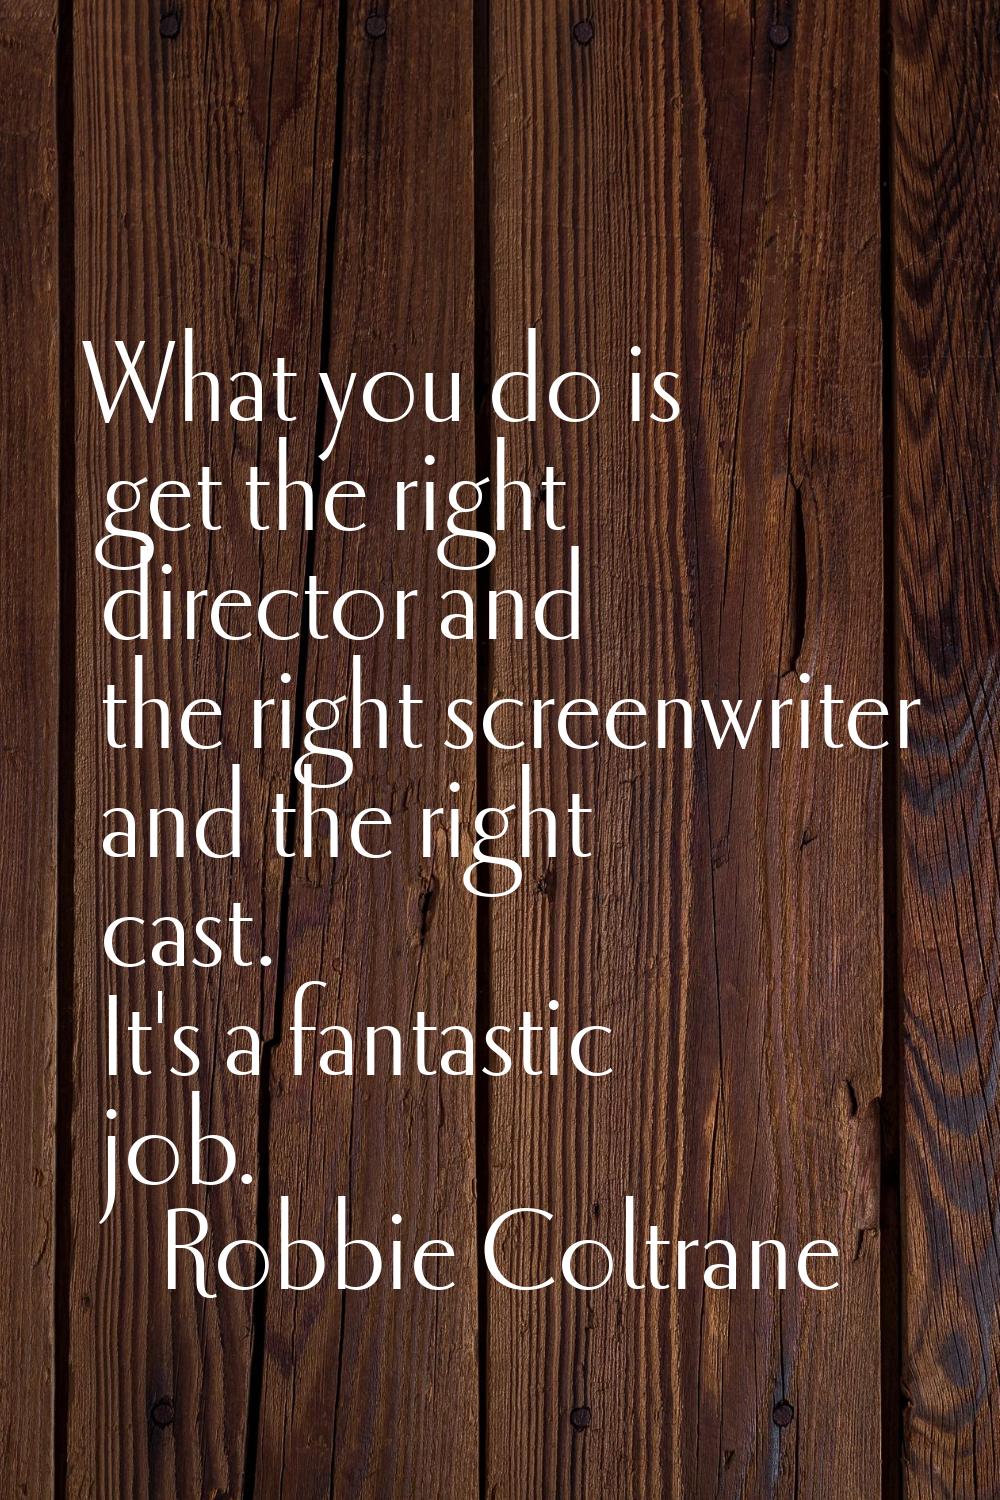 What you do is get the right director and the right screenwriter and the right cast. It's a fantast